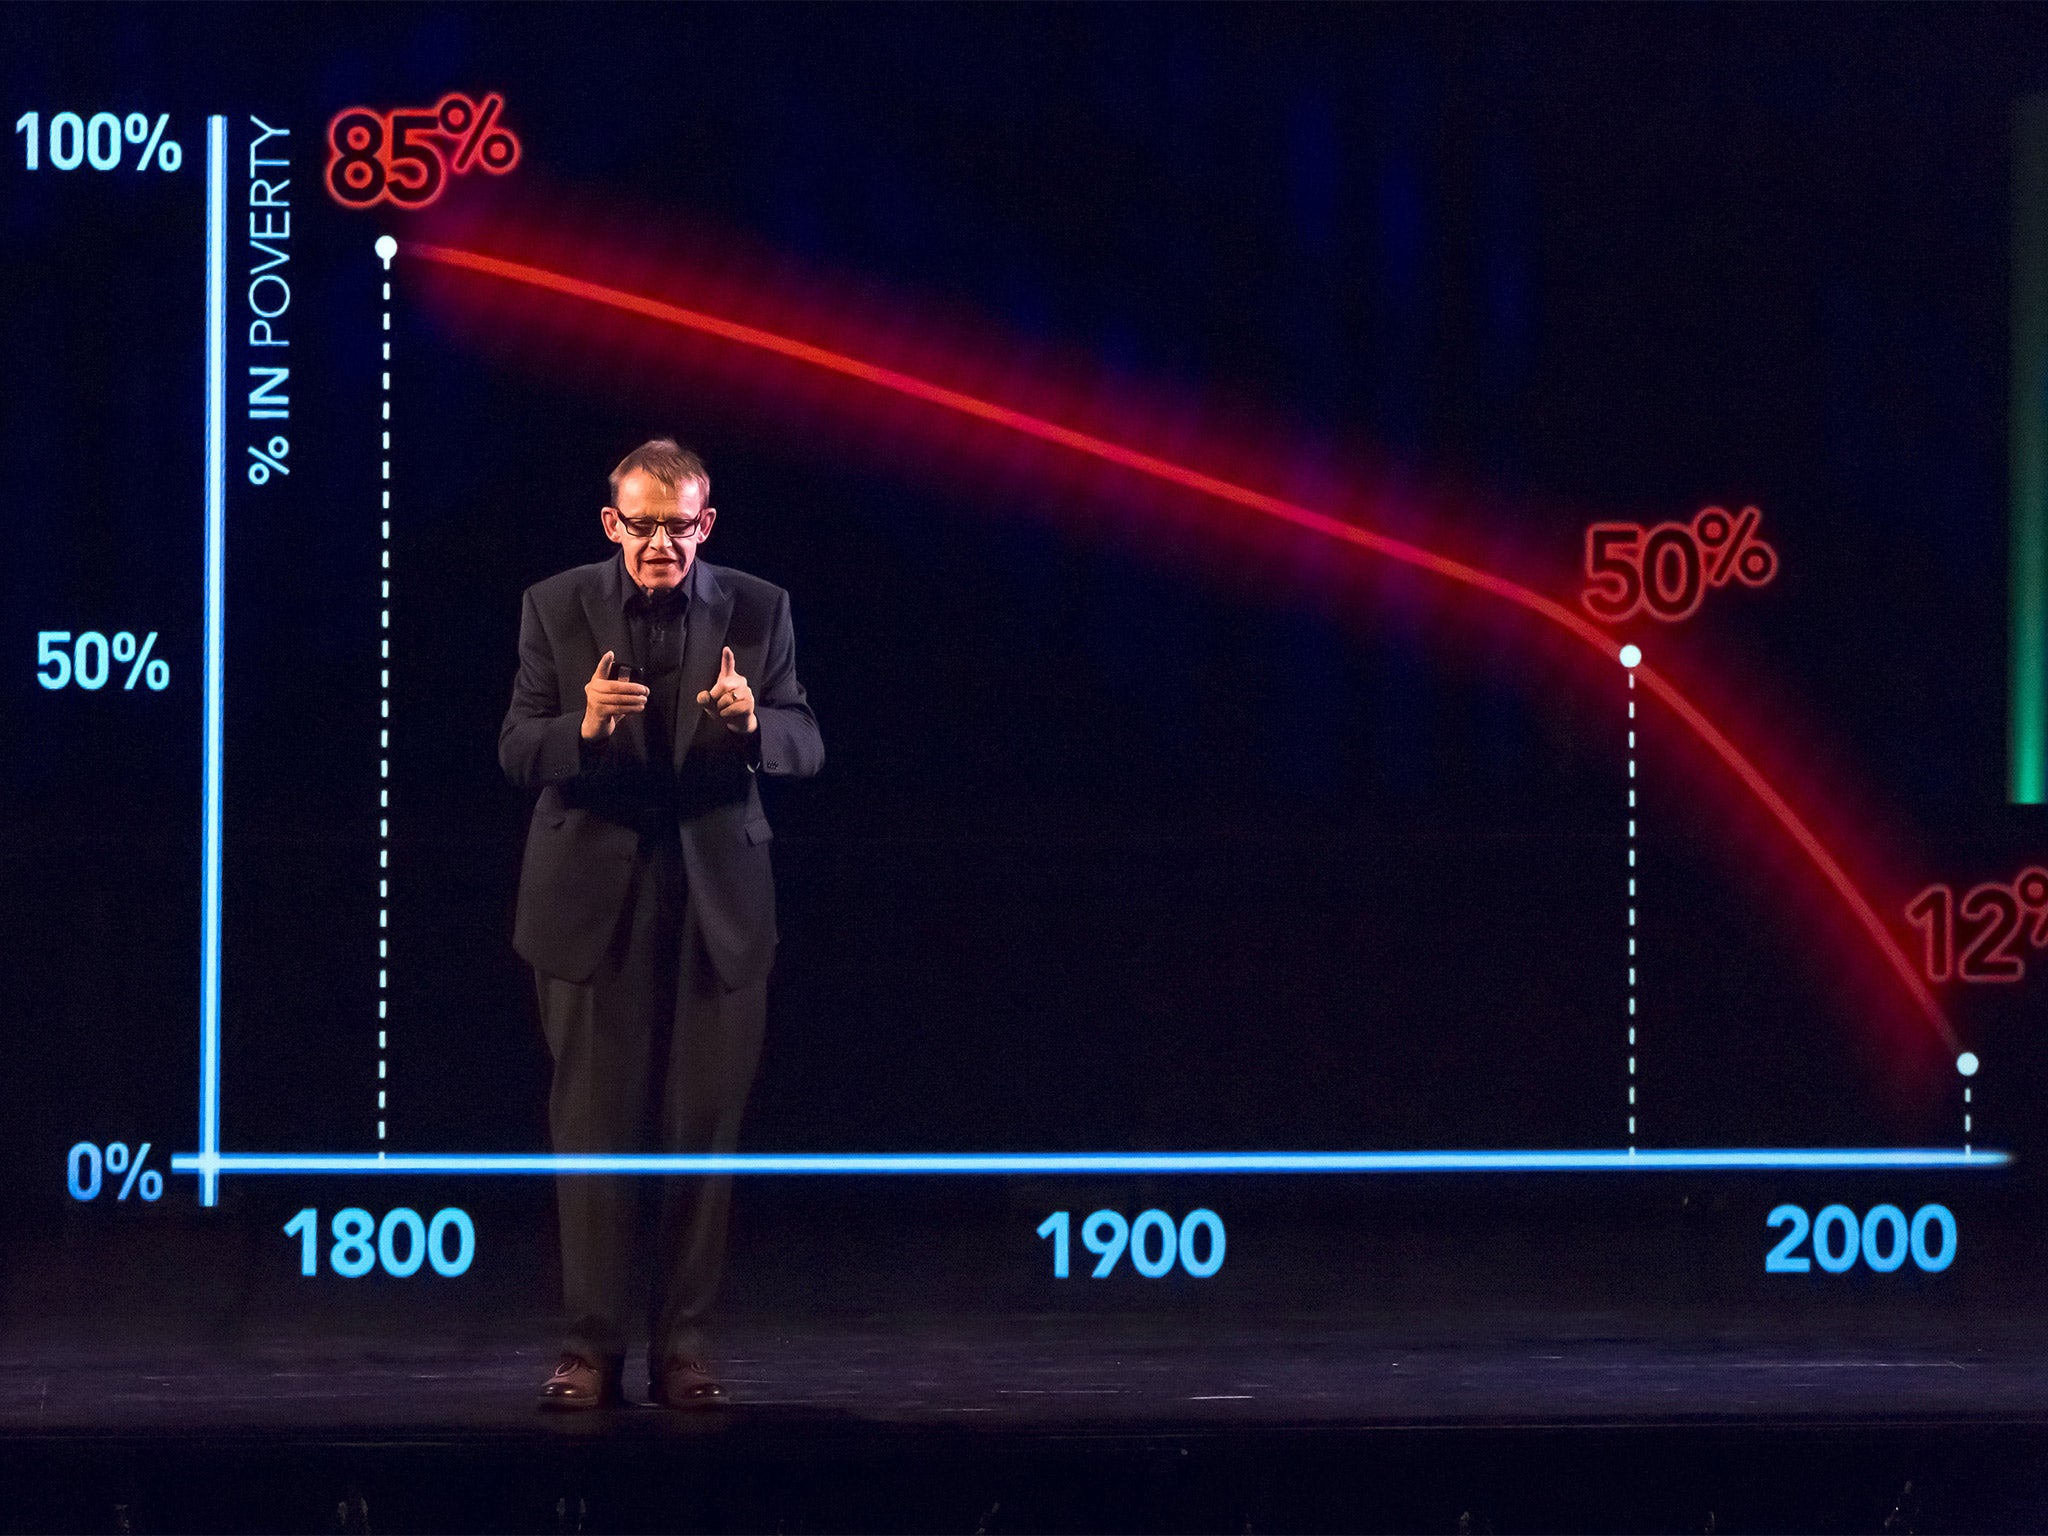 It all adds up: Hans Rosling presented ‘Don’t Panic: How To End Poverty in 15 Years’